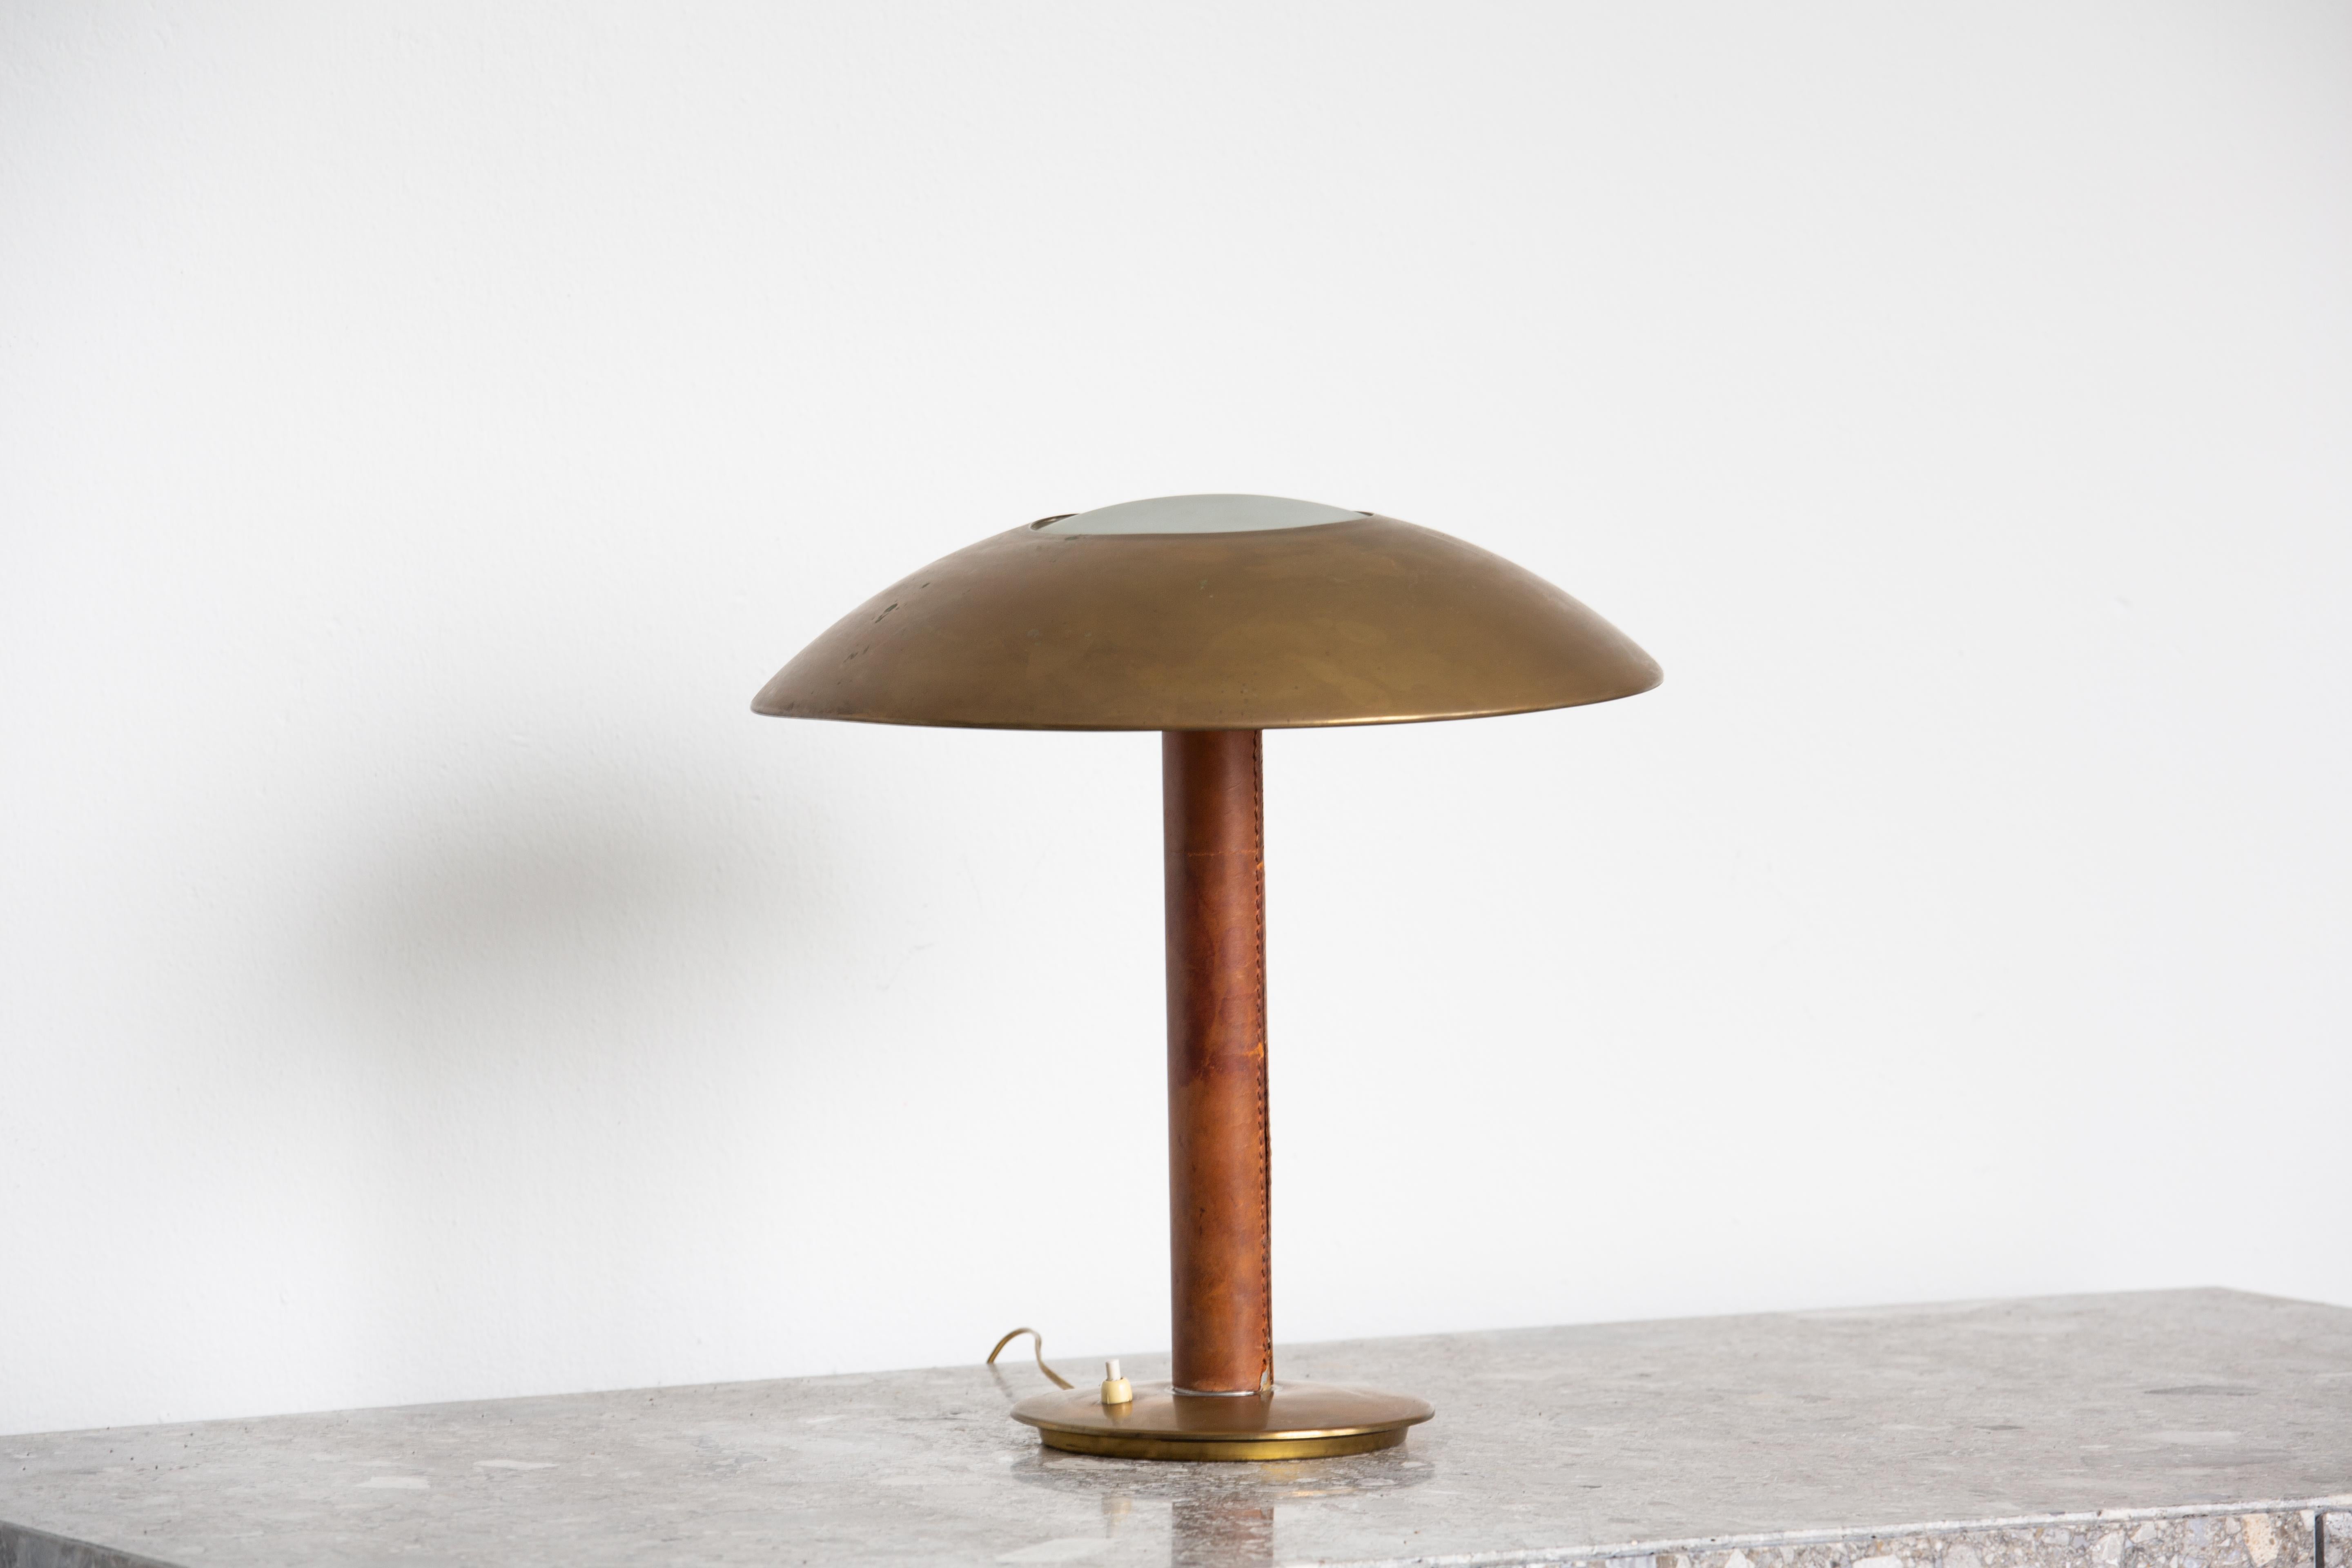 Mid-20th Century Vintage Brass and Leather Table Lamp by Stilnovo, Italian Production, 1950s